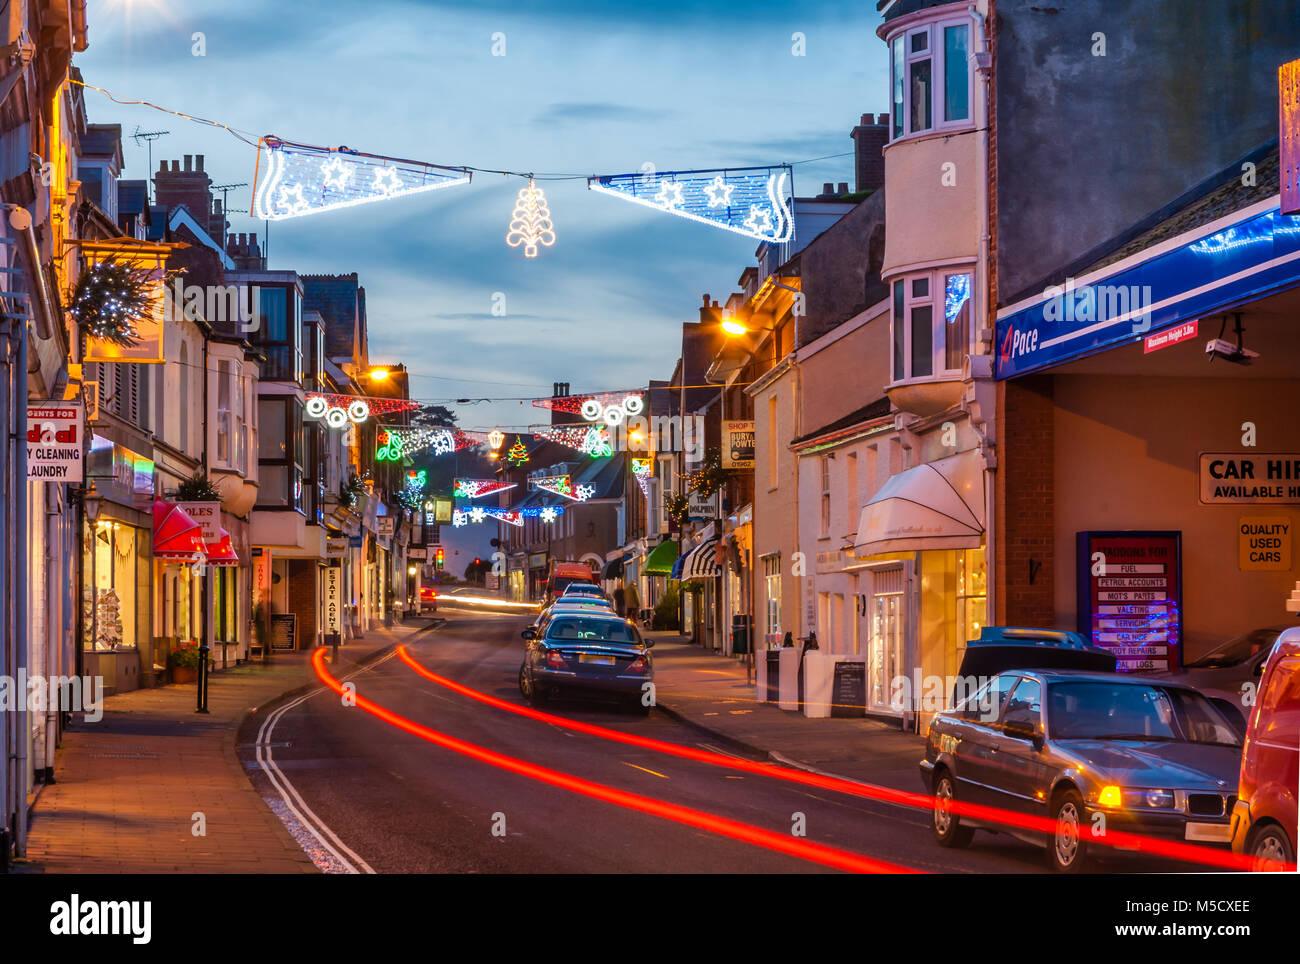 Budleigh High Street with Christmas decorations and car trails. Stock Photo